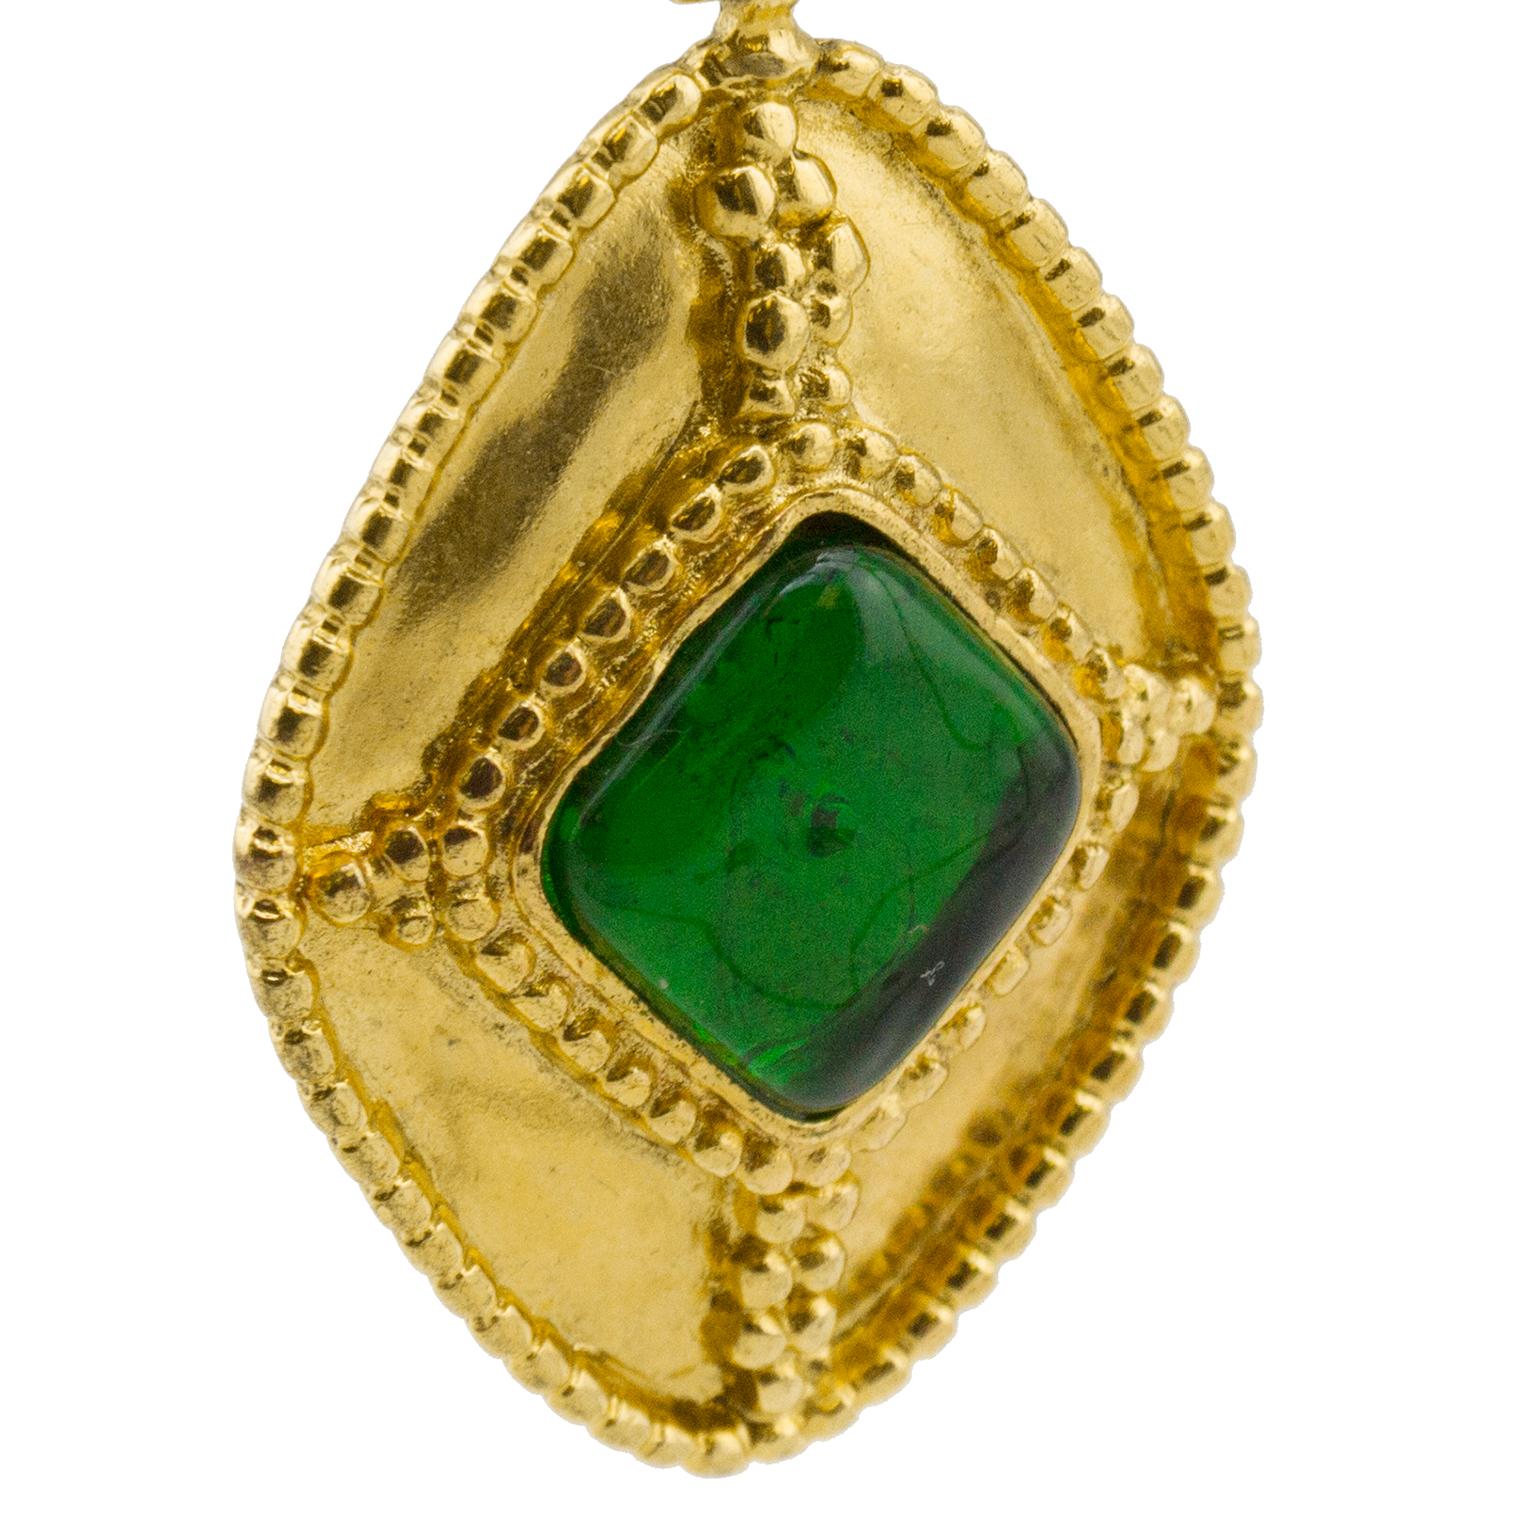 Women's or Men's 1996 Fall Collection Chanel Pin with Green Stone